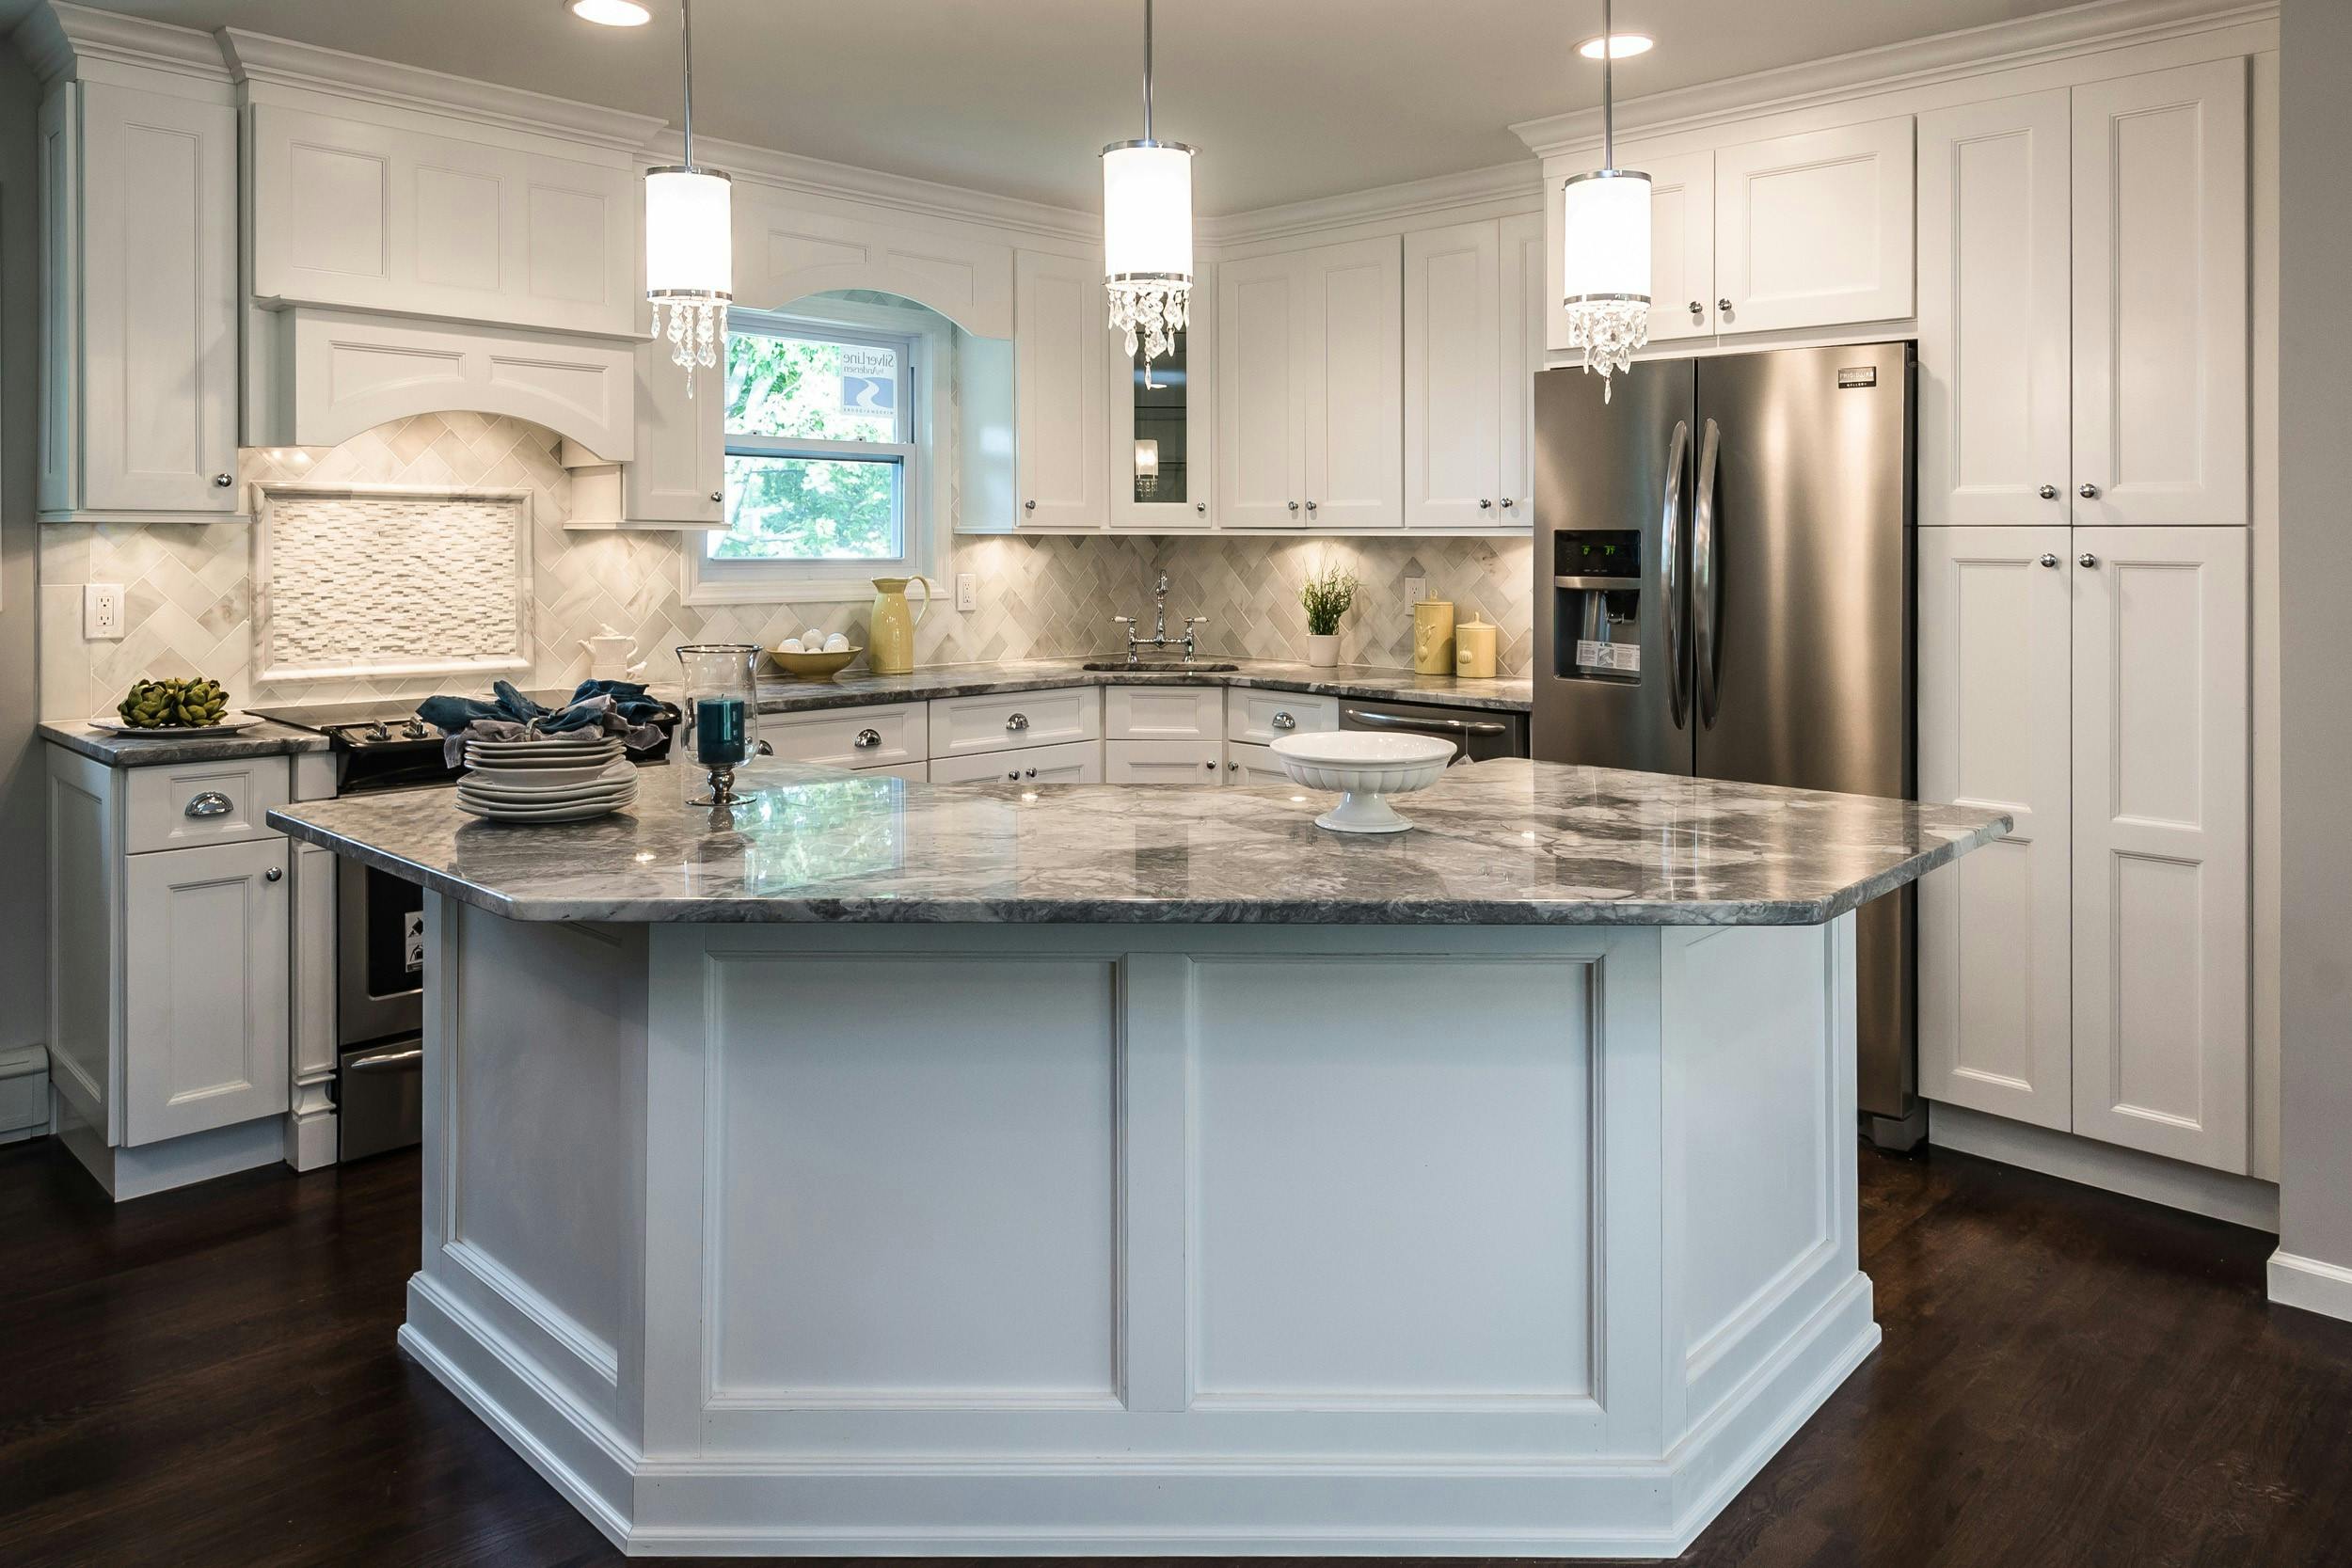 Kitchen Countertops And Cabinets, White Cabinets With Countertops